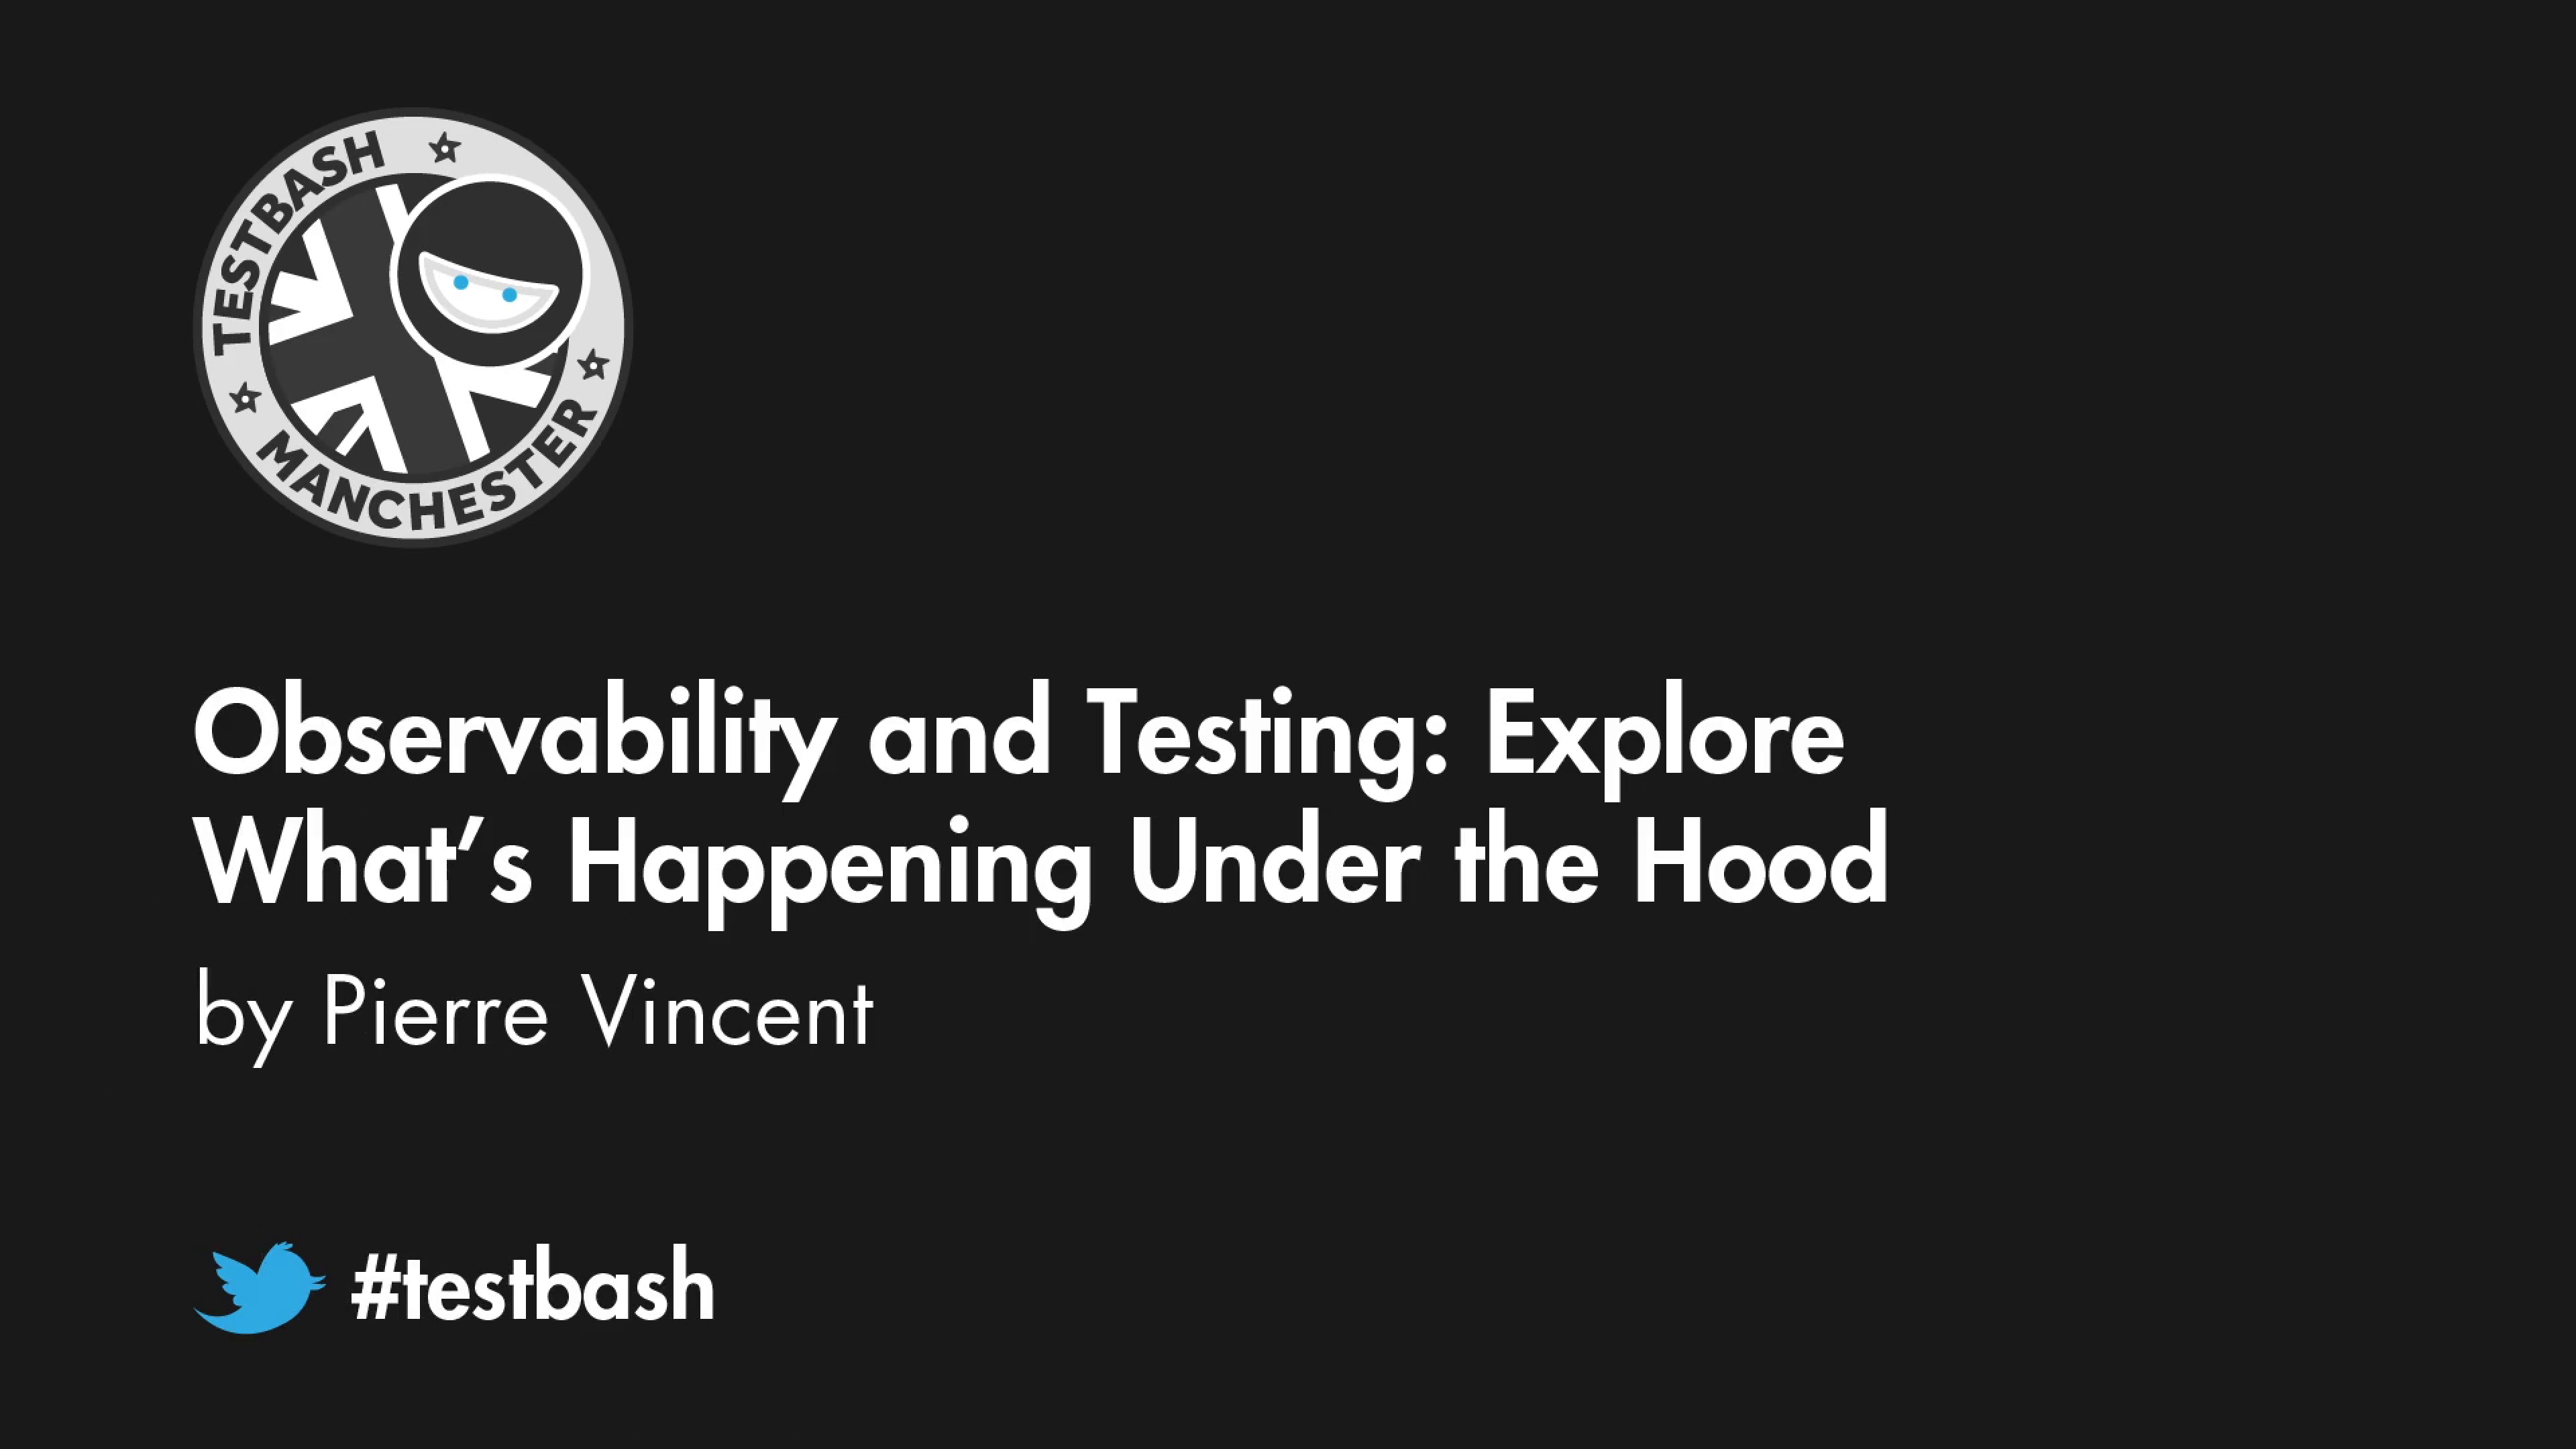 Observability and Testing: Explore What's Happening Under the Hood - Pierre Vincent